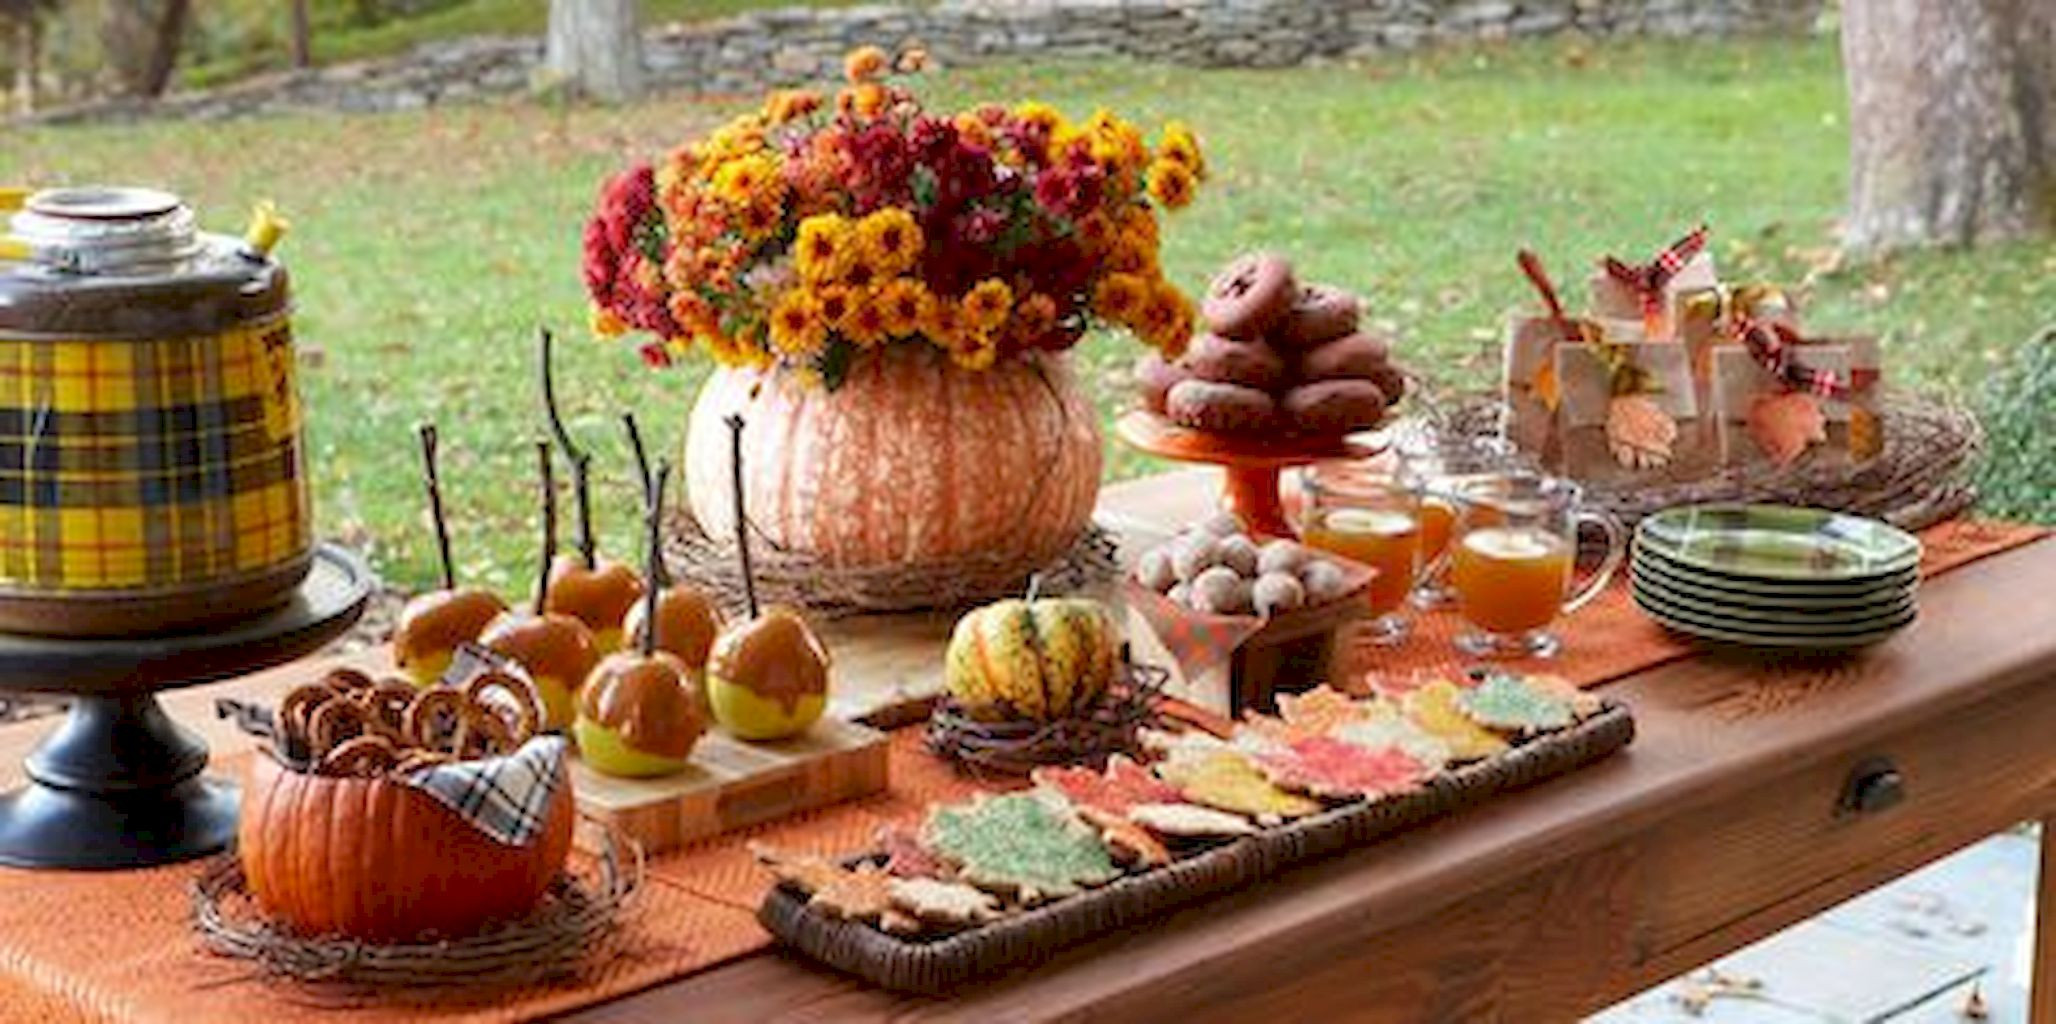 Thanksgiving Dinner Table Decorations
 60 DIY Thanksgiving Centerpieces Ideas on Friendly Bud